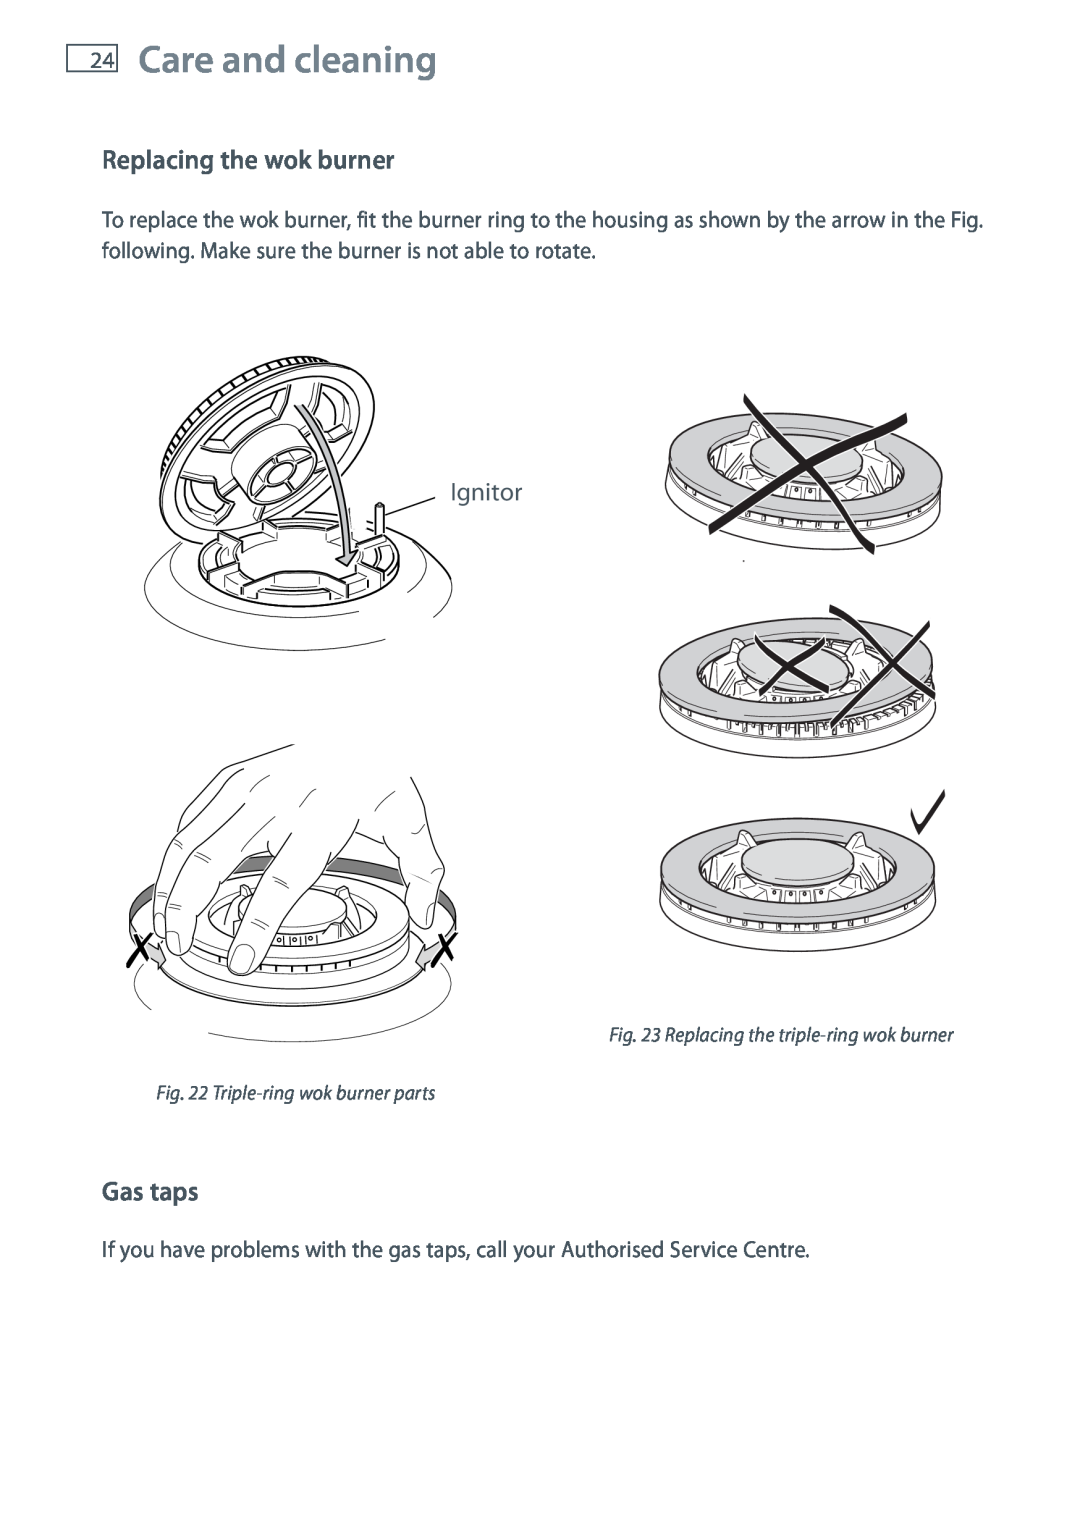 Fisher & Paykel 60 installation instructions Replacing the wok burner, Gas taps, Ignitor, Care and cleaning 